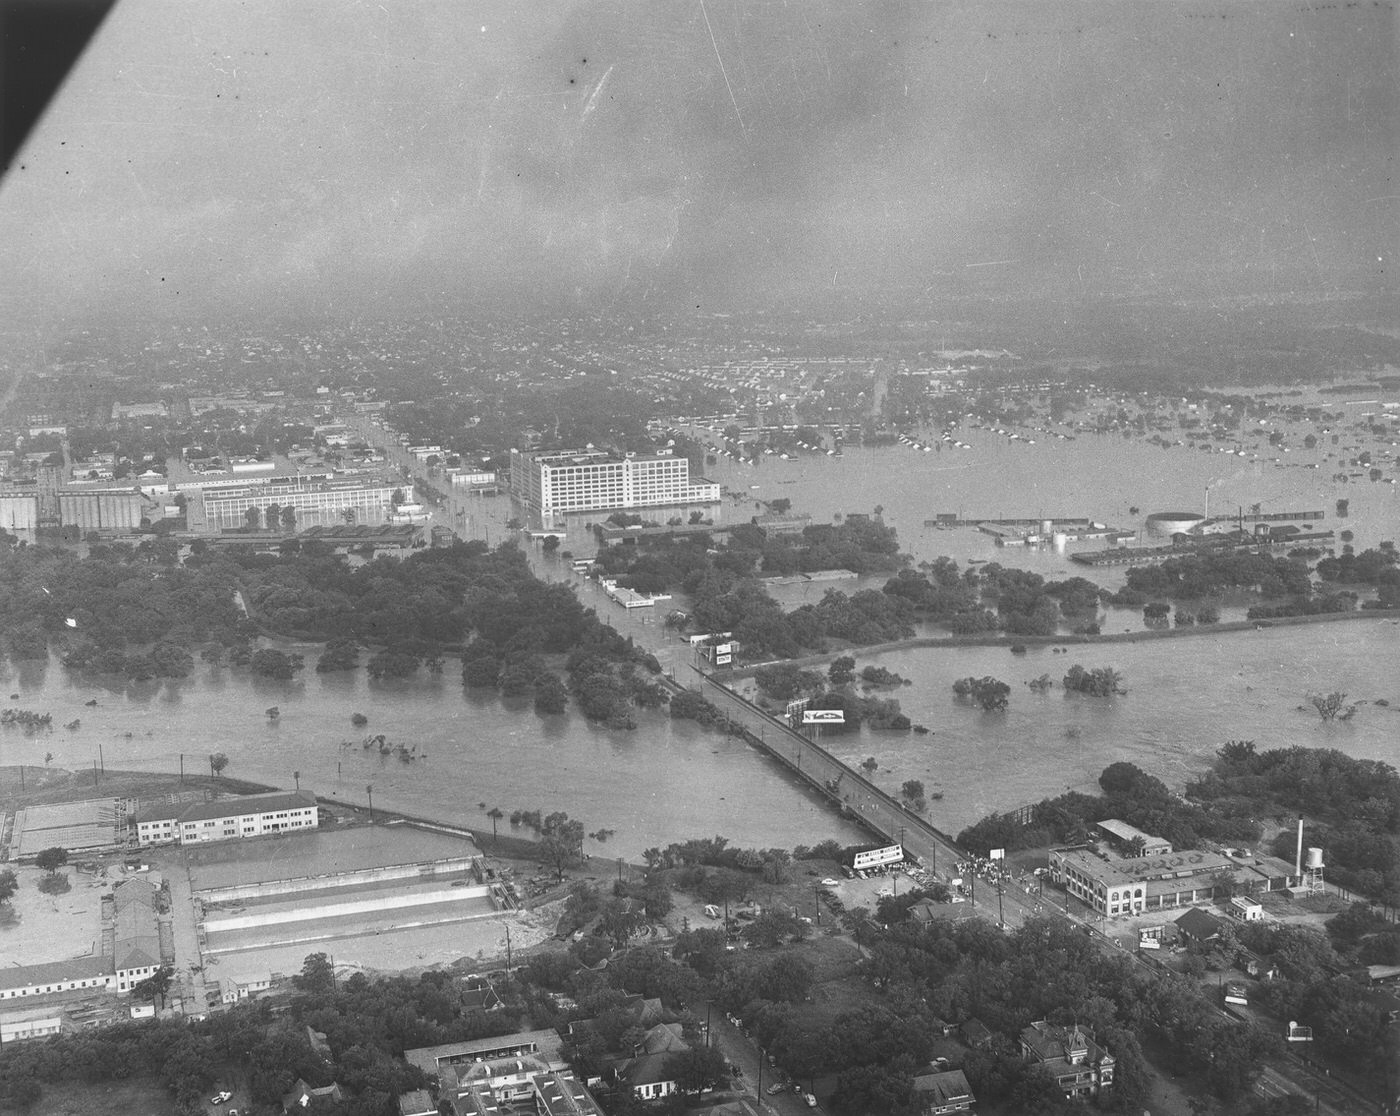 Aerial view of the 1949 flood showing the 7th Street bridge and the Montgomery Ward building, Fort Worth, Texas, 1949